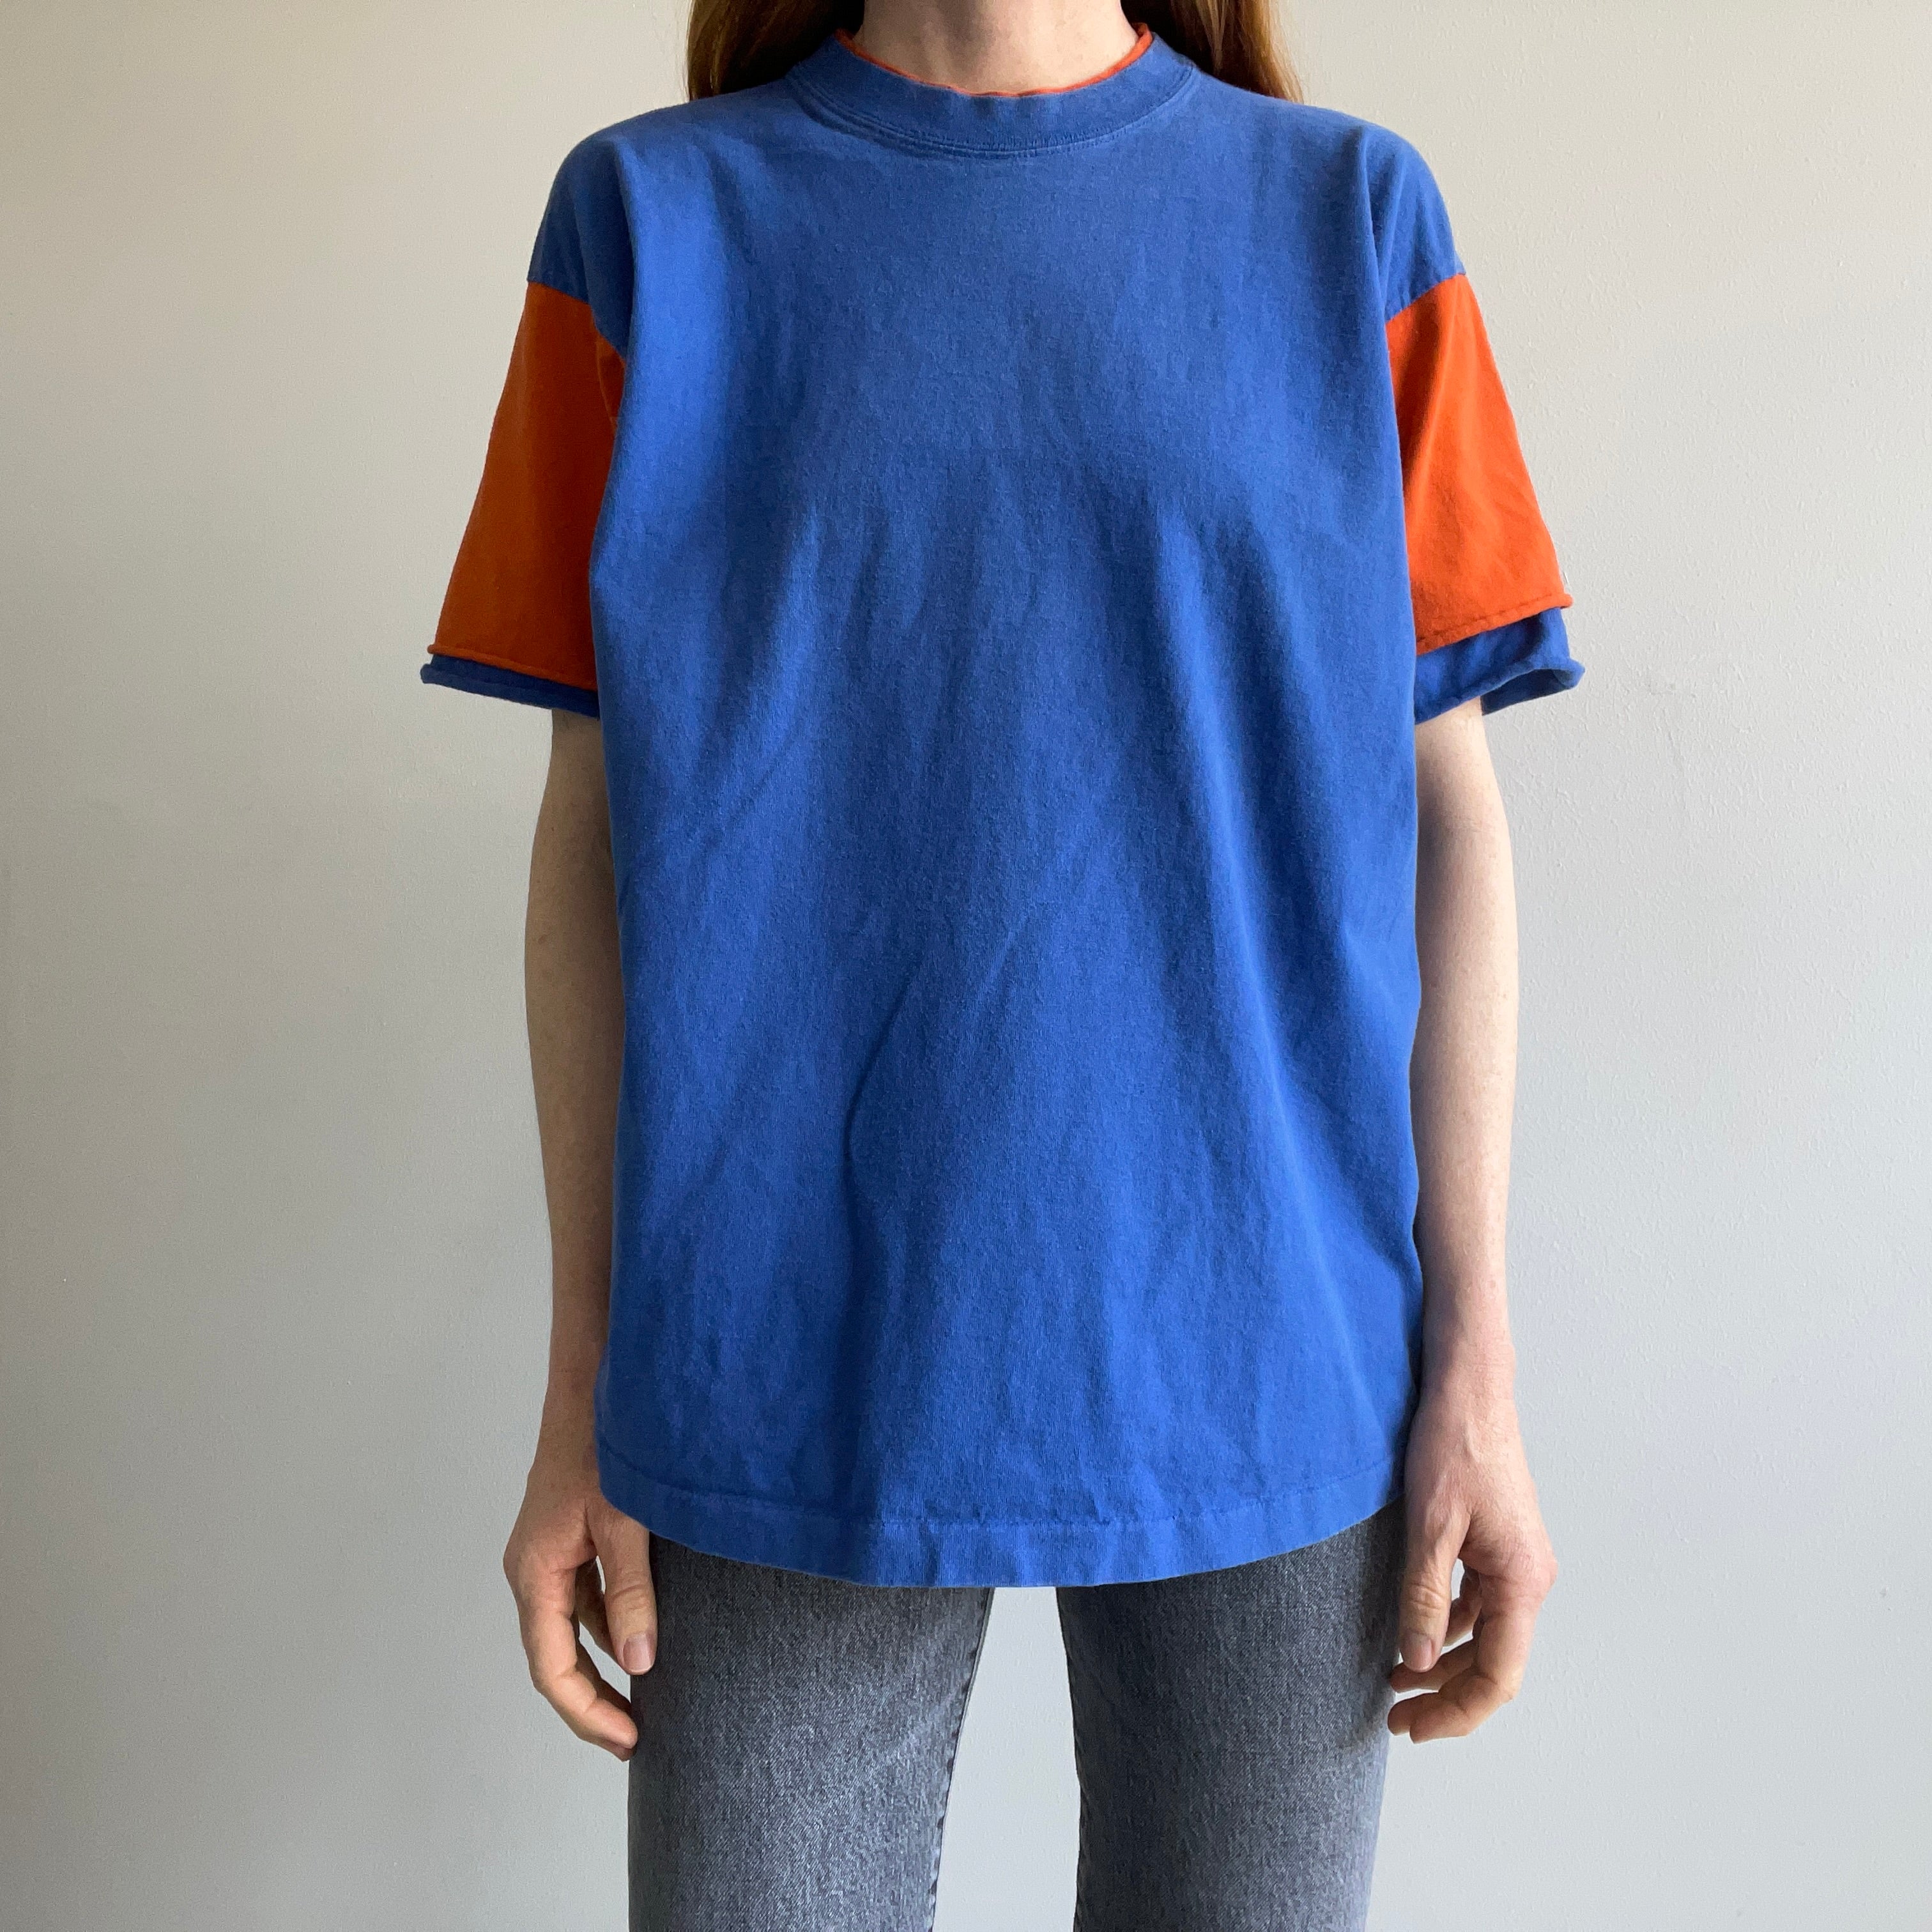 1980/90s Two Tone Orange and Blue Cotton T-Shirt